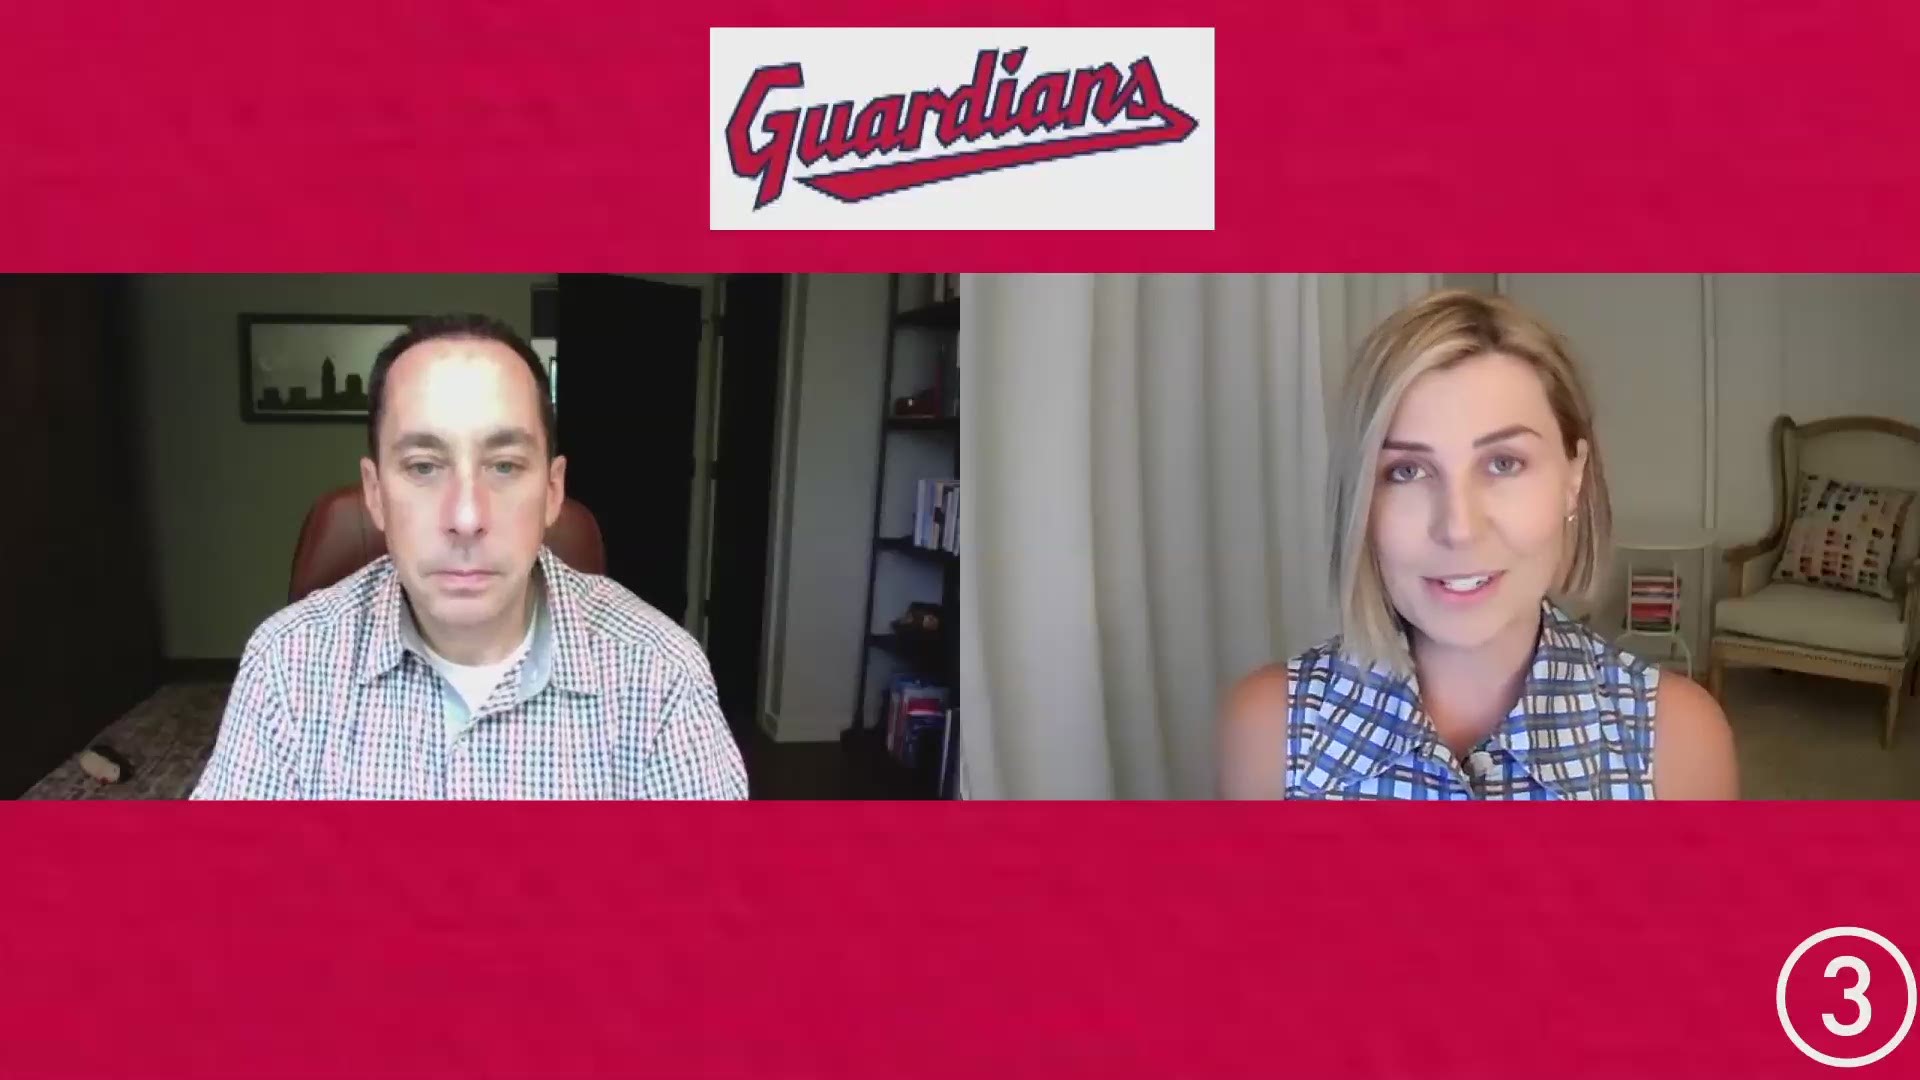 Speaking with 3News' Sara Shookman, Greater Cleveland Sports Commission CEO David Gilbert shared his reaction to the Cleveland Indians' new name.